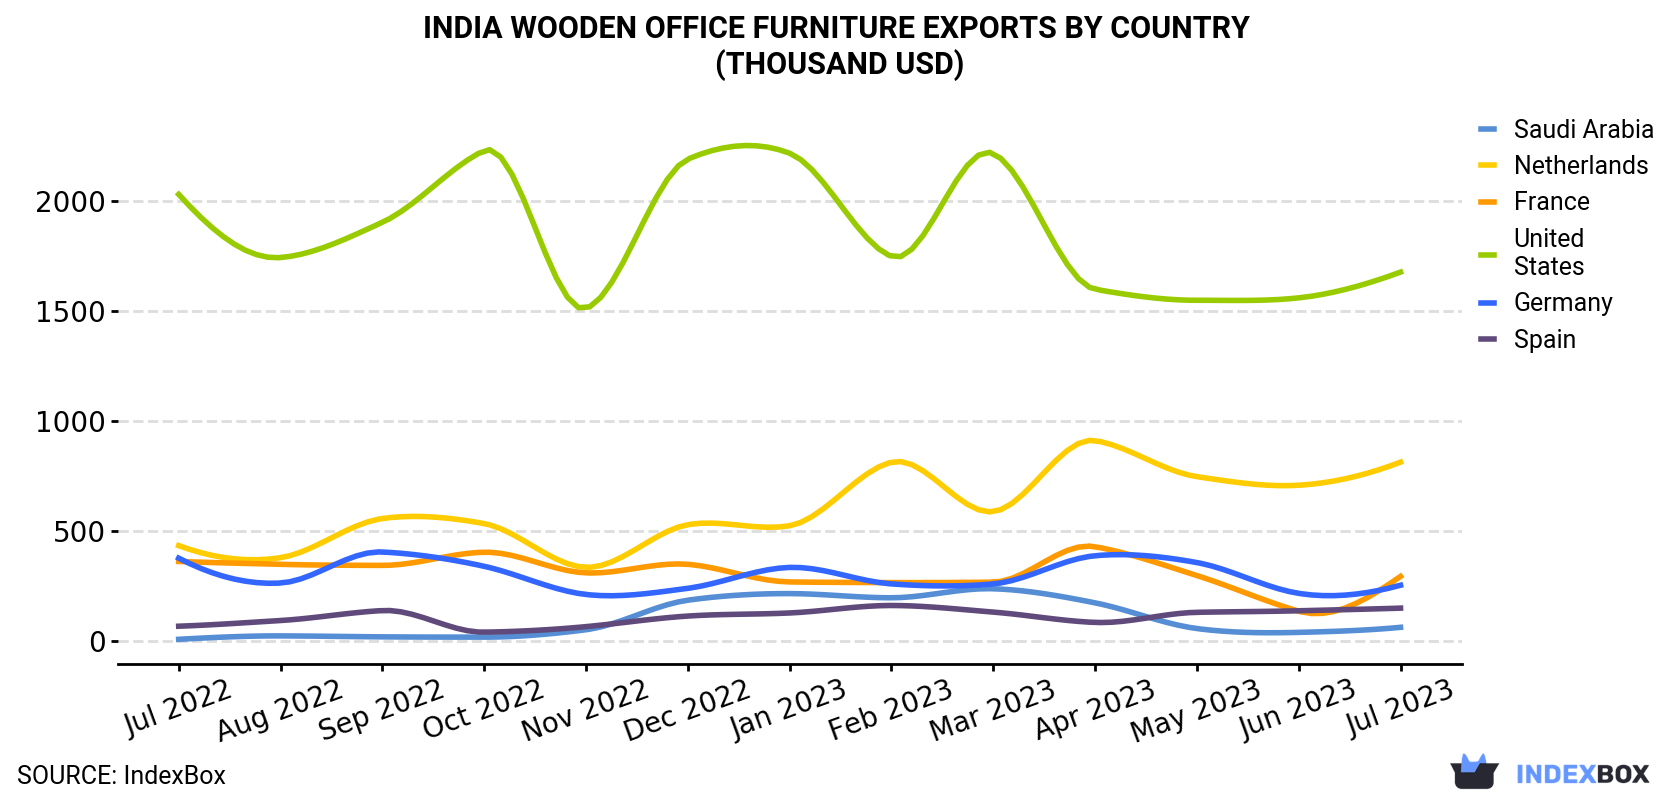 India Wooden Office Furniture Exports By Country (Thousand USD)